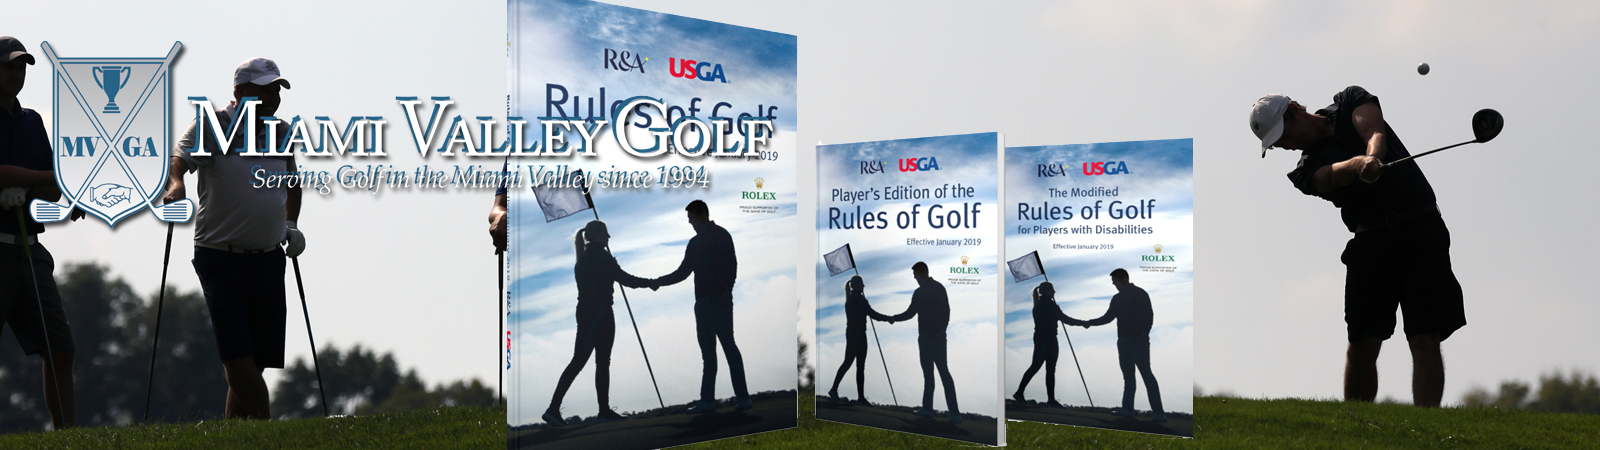 Rules_of_Golf_General_Banner